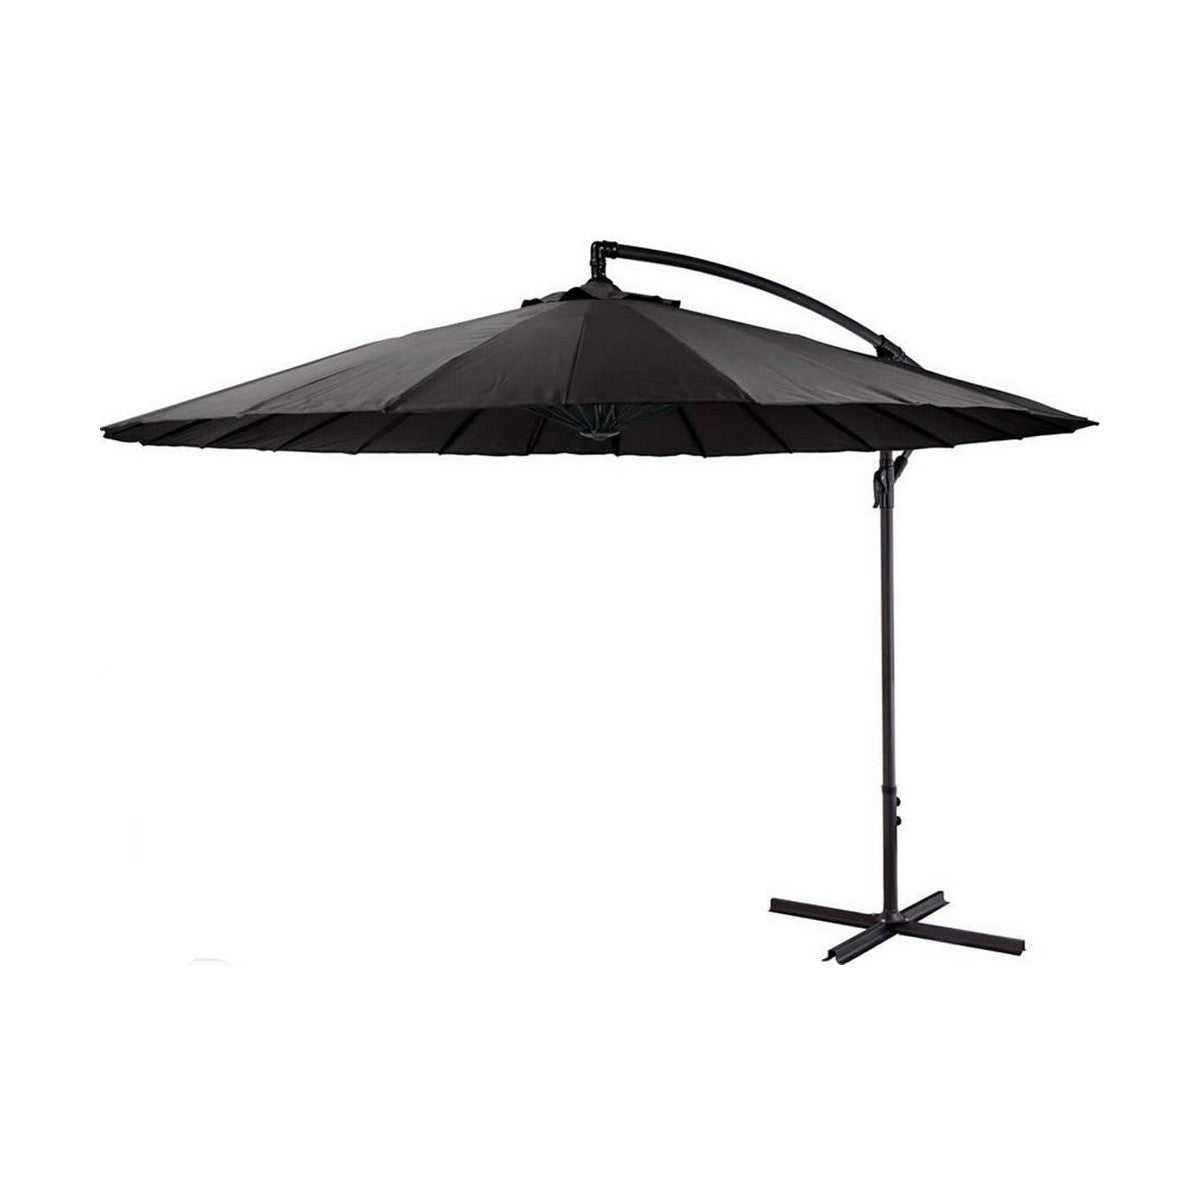 Parasol basculante y giratorio Deported Ambiance Loft Gris Oscuro 